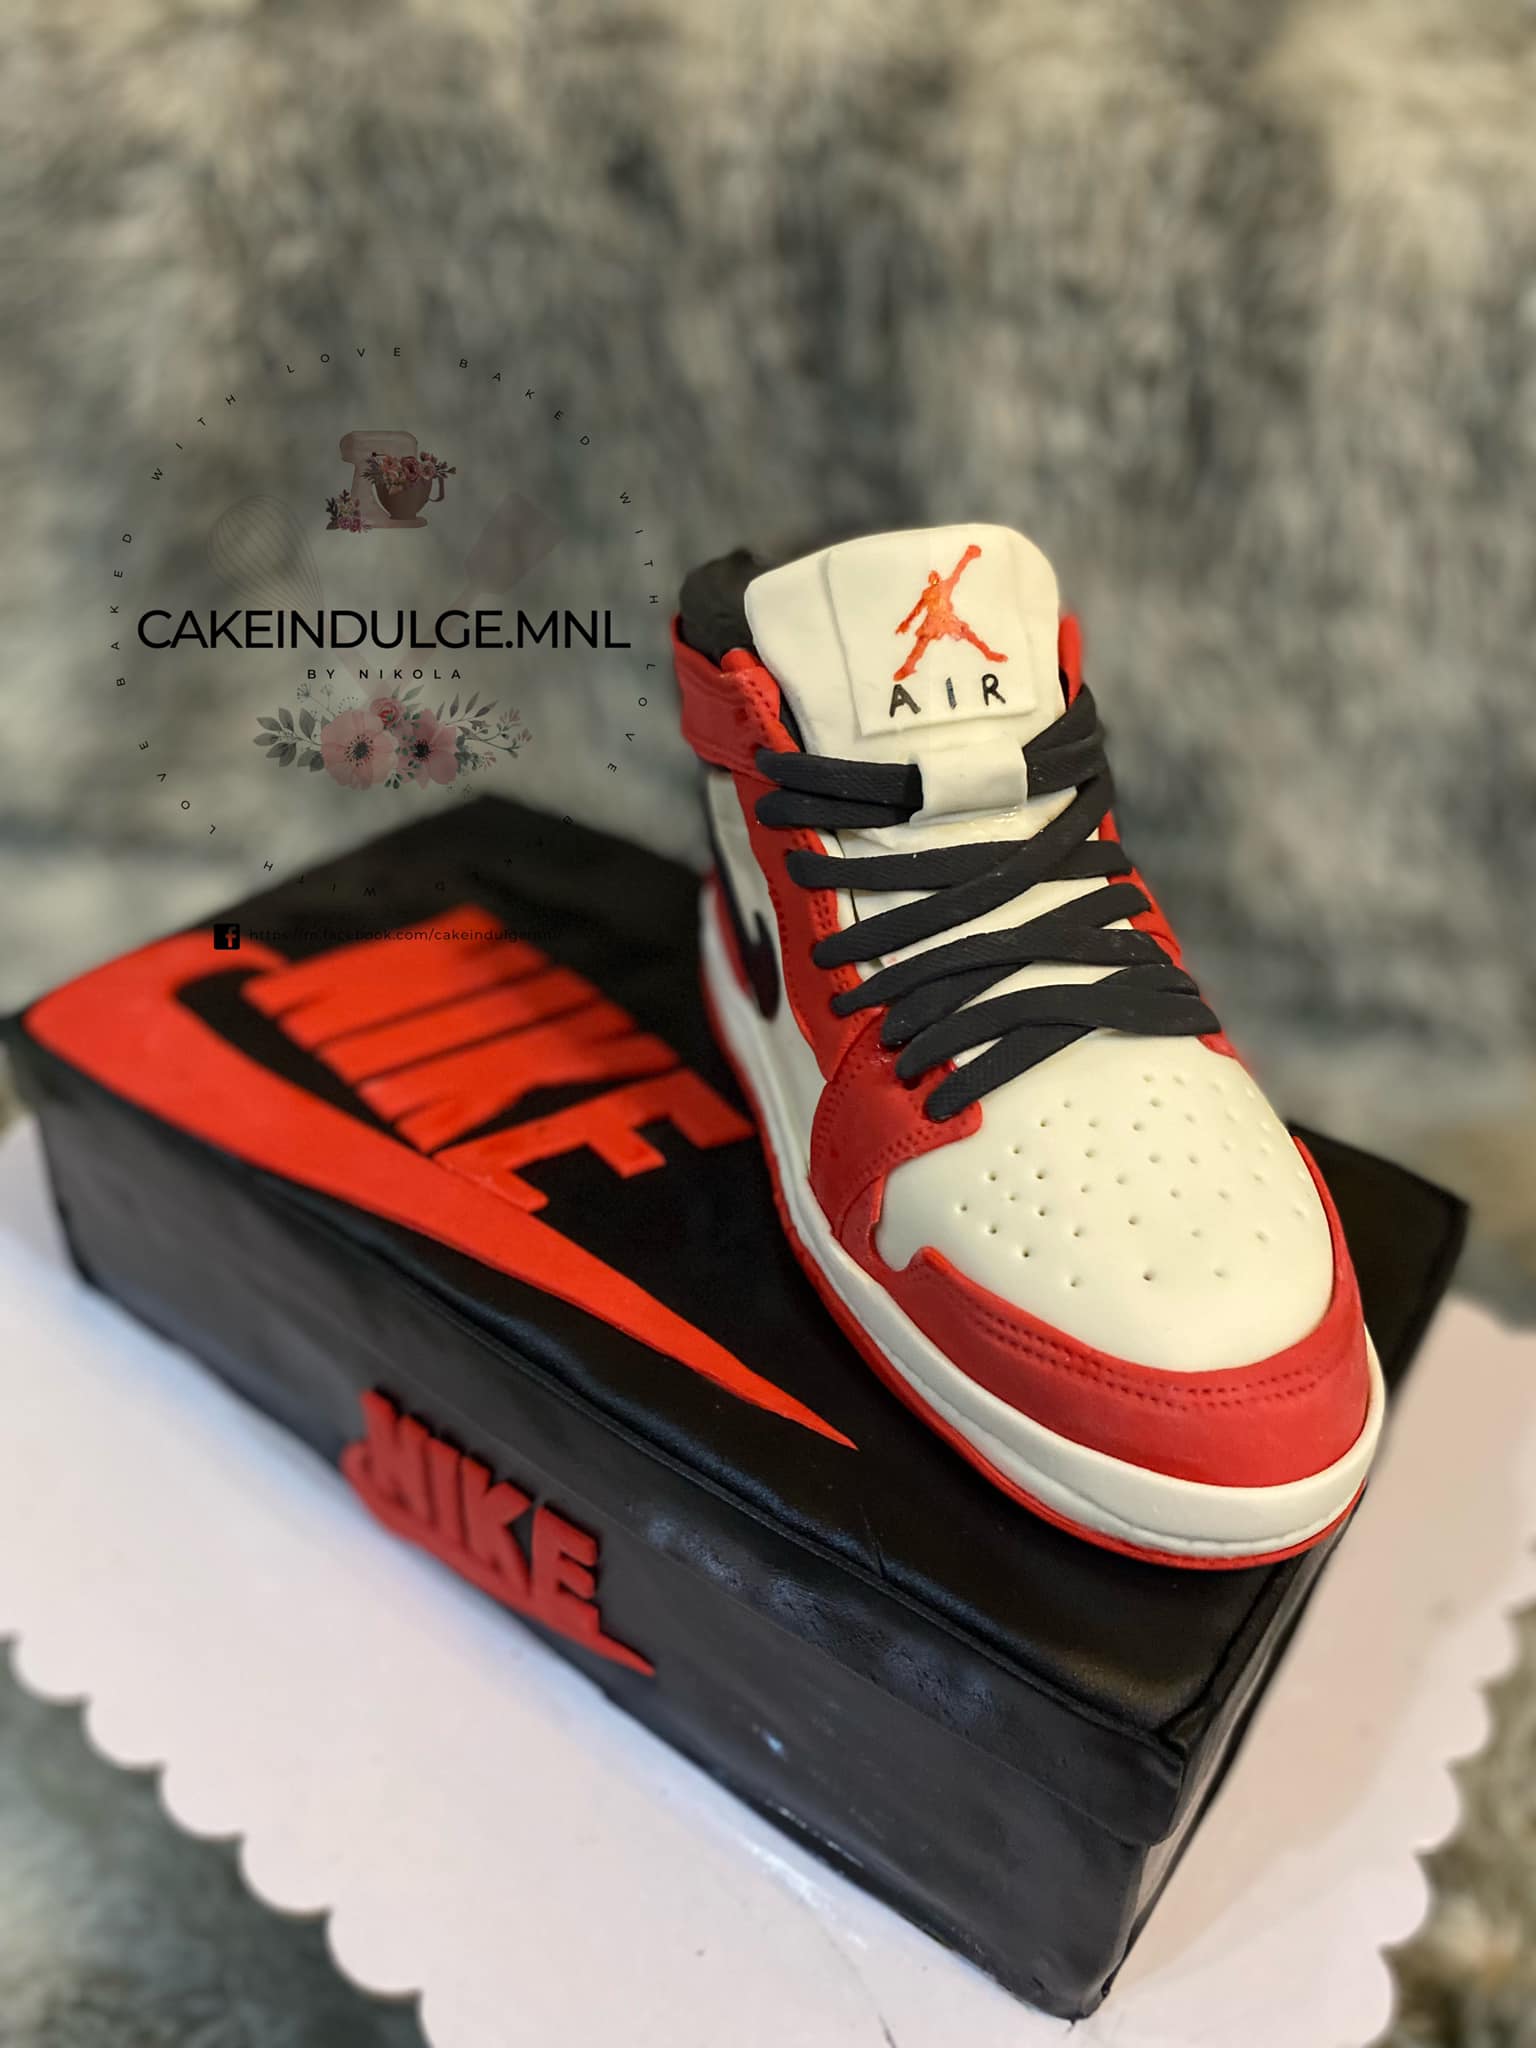 Cool Shoe Cake for Best Friend's Birthday